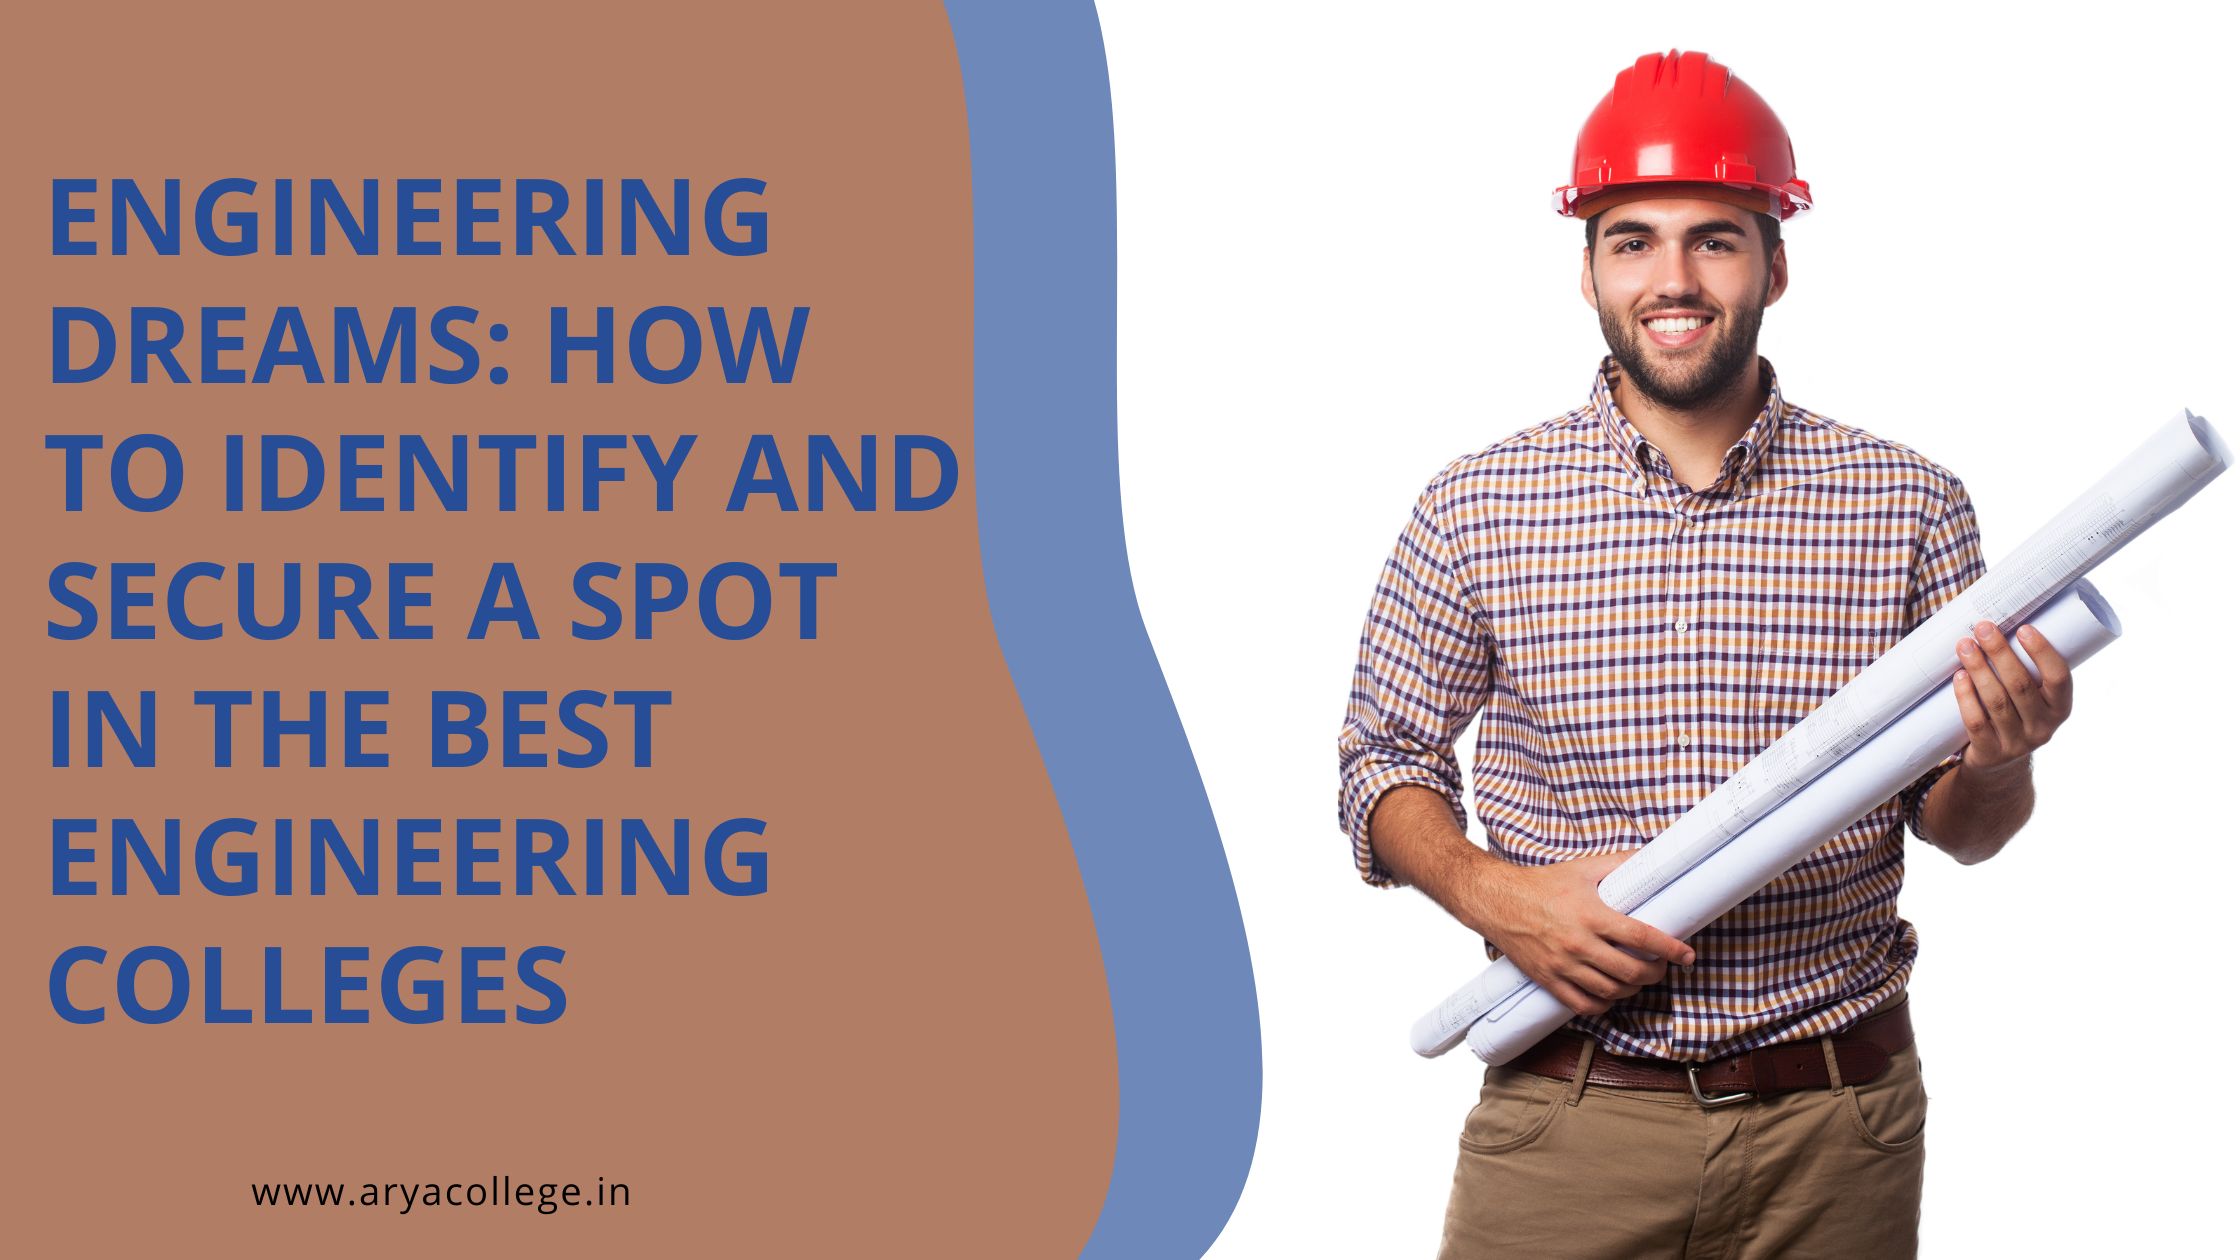 Engineering Dreams: How to Identify and Secure a Spot in the Best Engineering Colleges